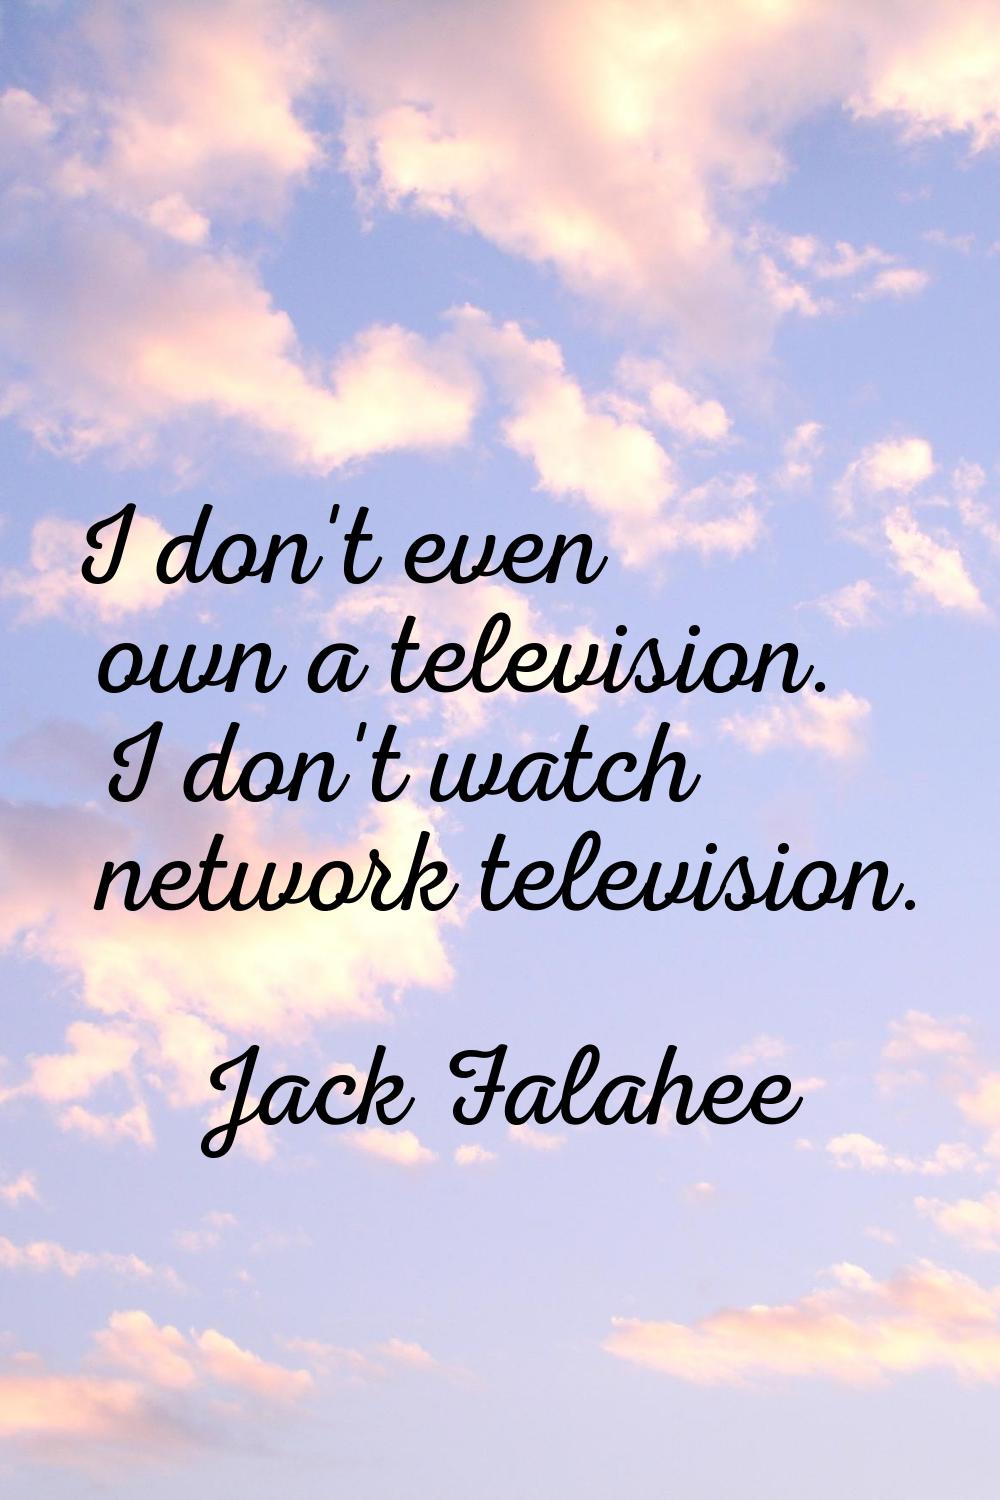 I don't even own a television. I don't watch network television.